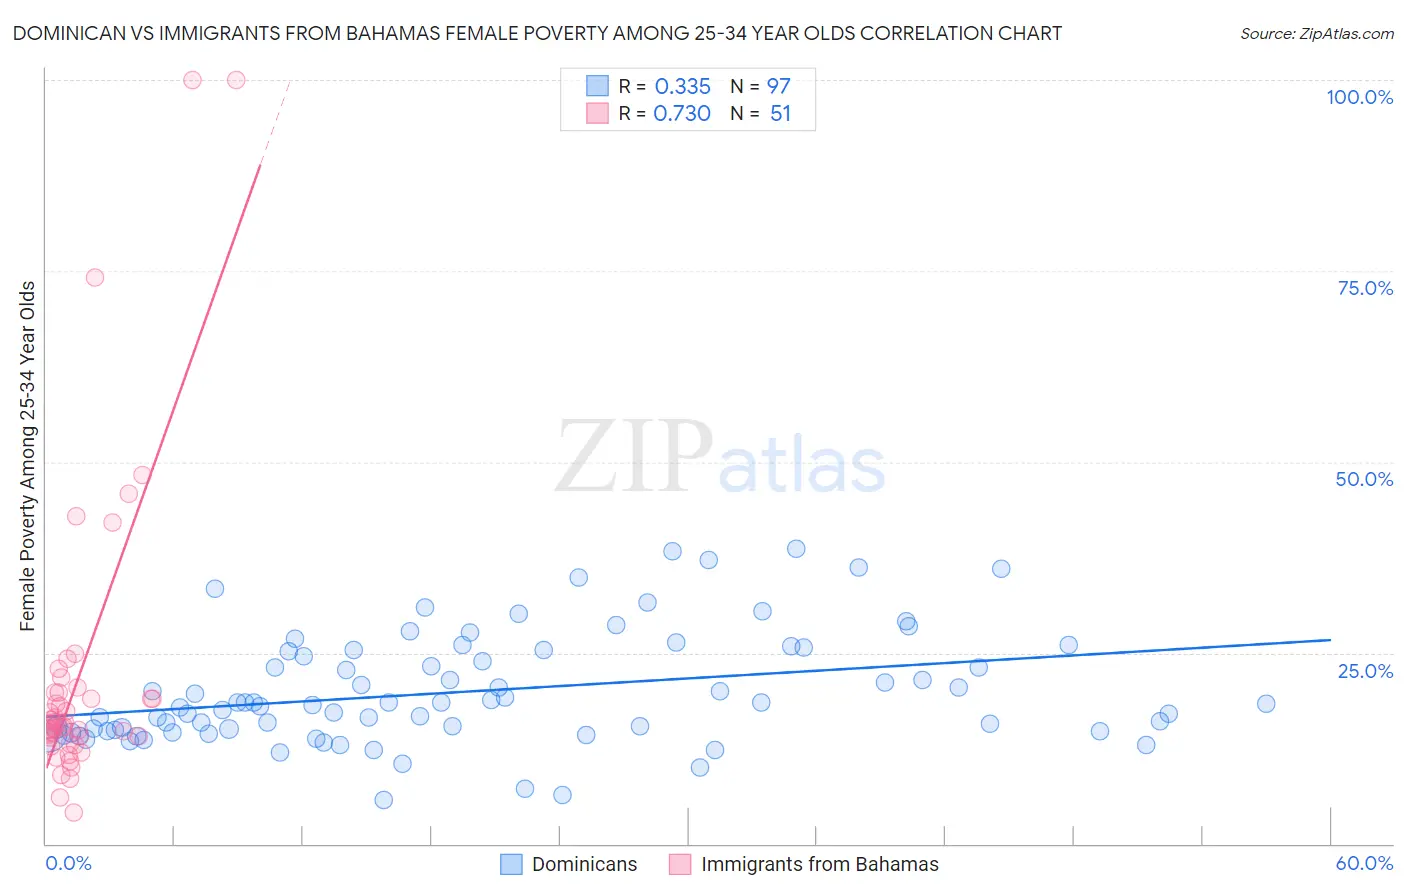 Dominican vs Immigrants from Bahamas Female Poverty Among 25-34 Year Olds